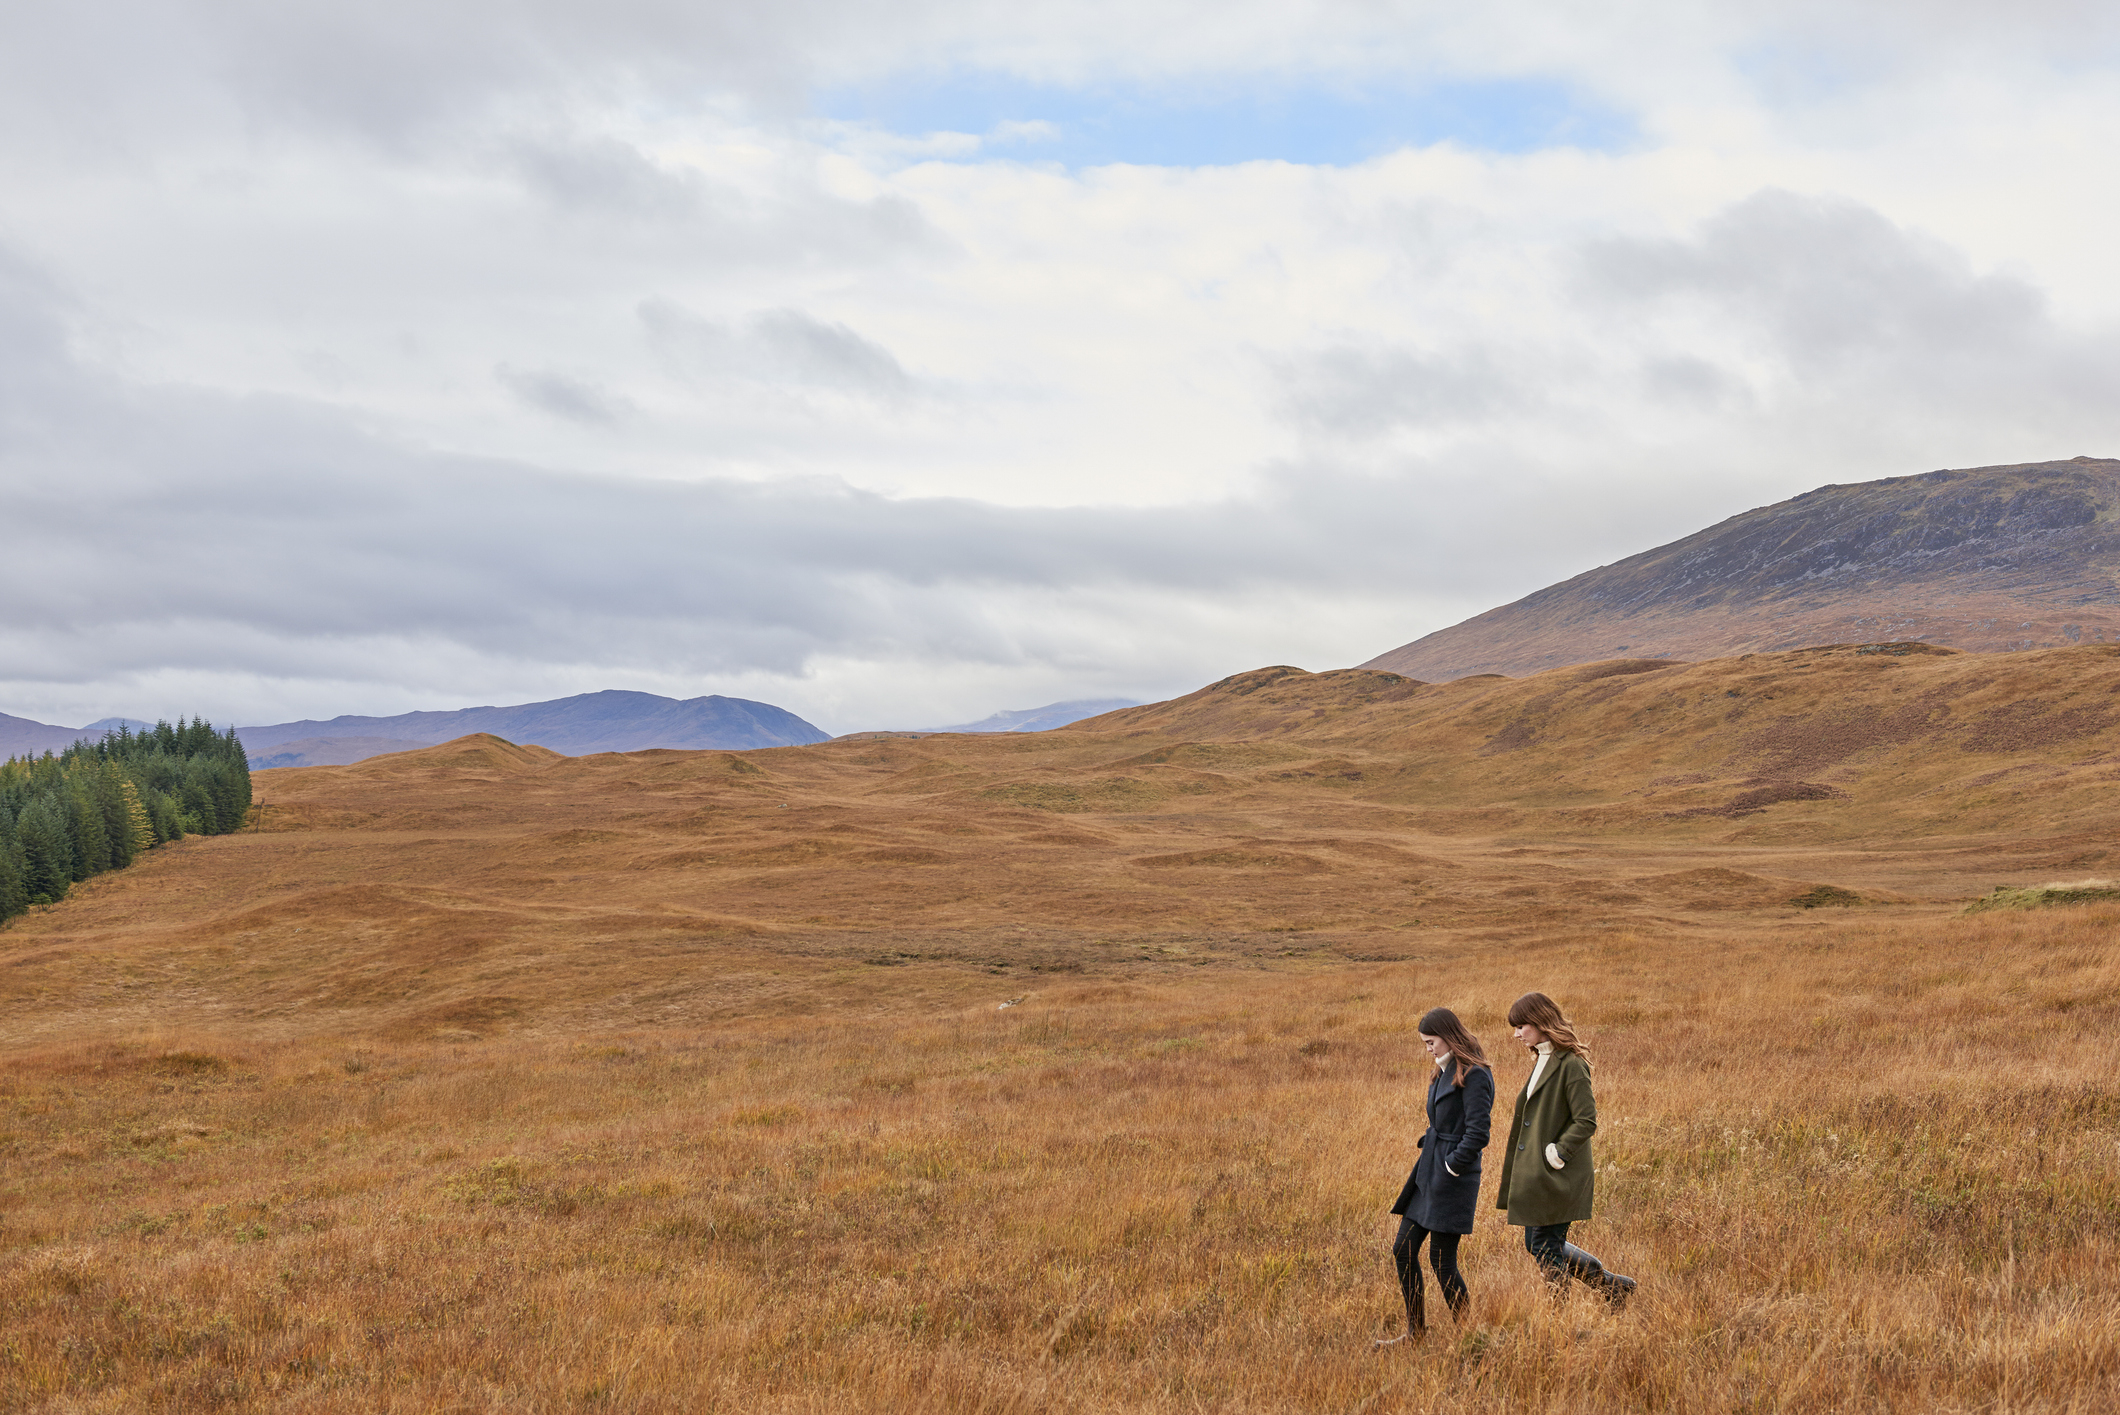 Two people walking through a vast, open field with gentle hills in the background